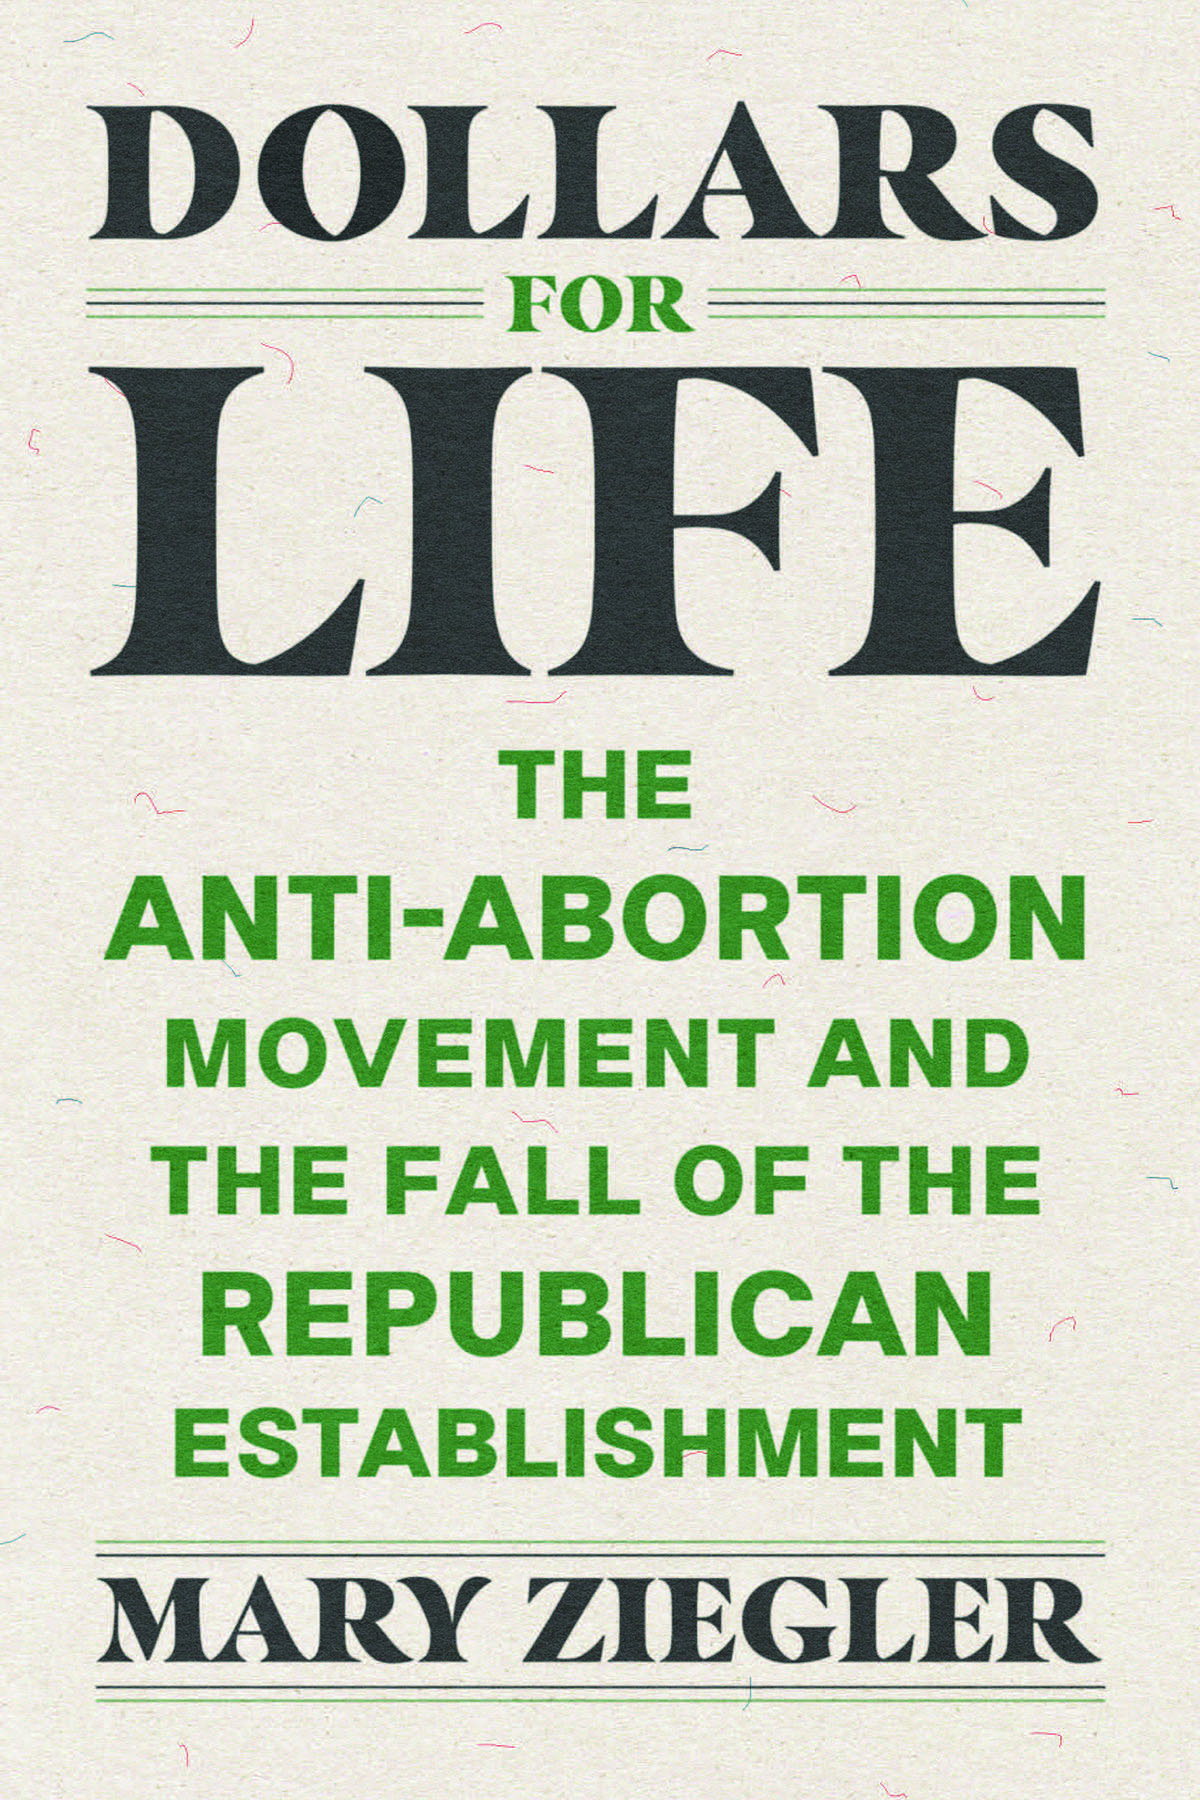 Cover of Mary Ziegler's book "Dollars for Life: The Anti-Abortion Movement and the Fall of the Republican Establishment."